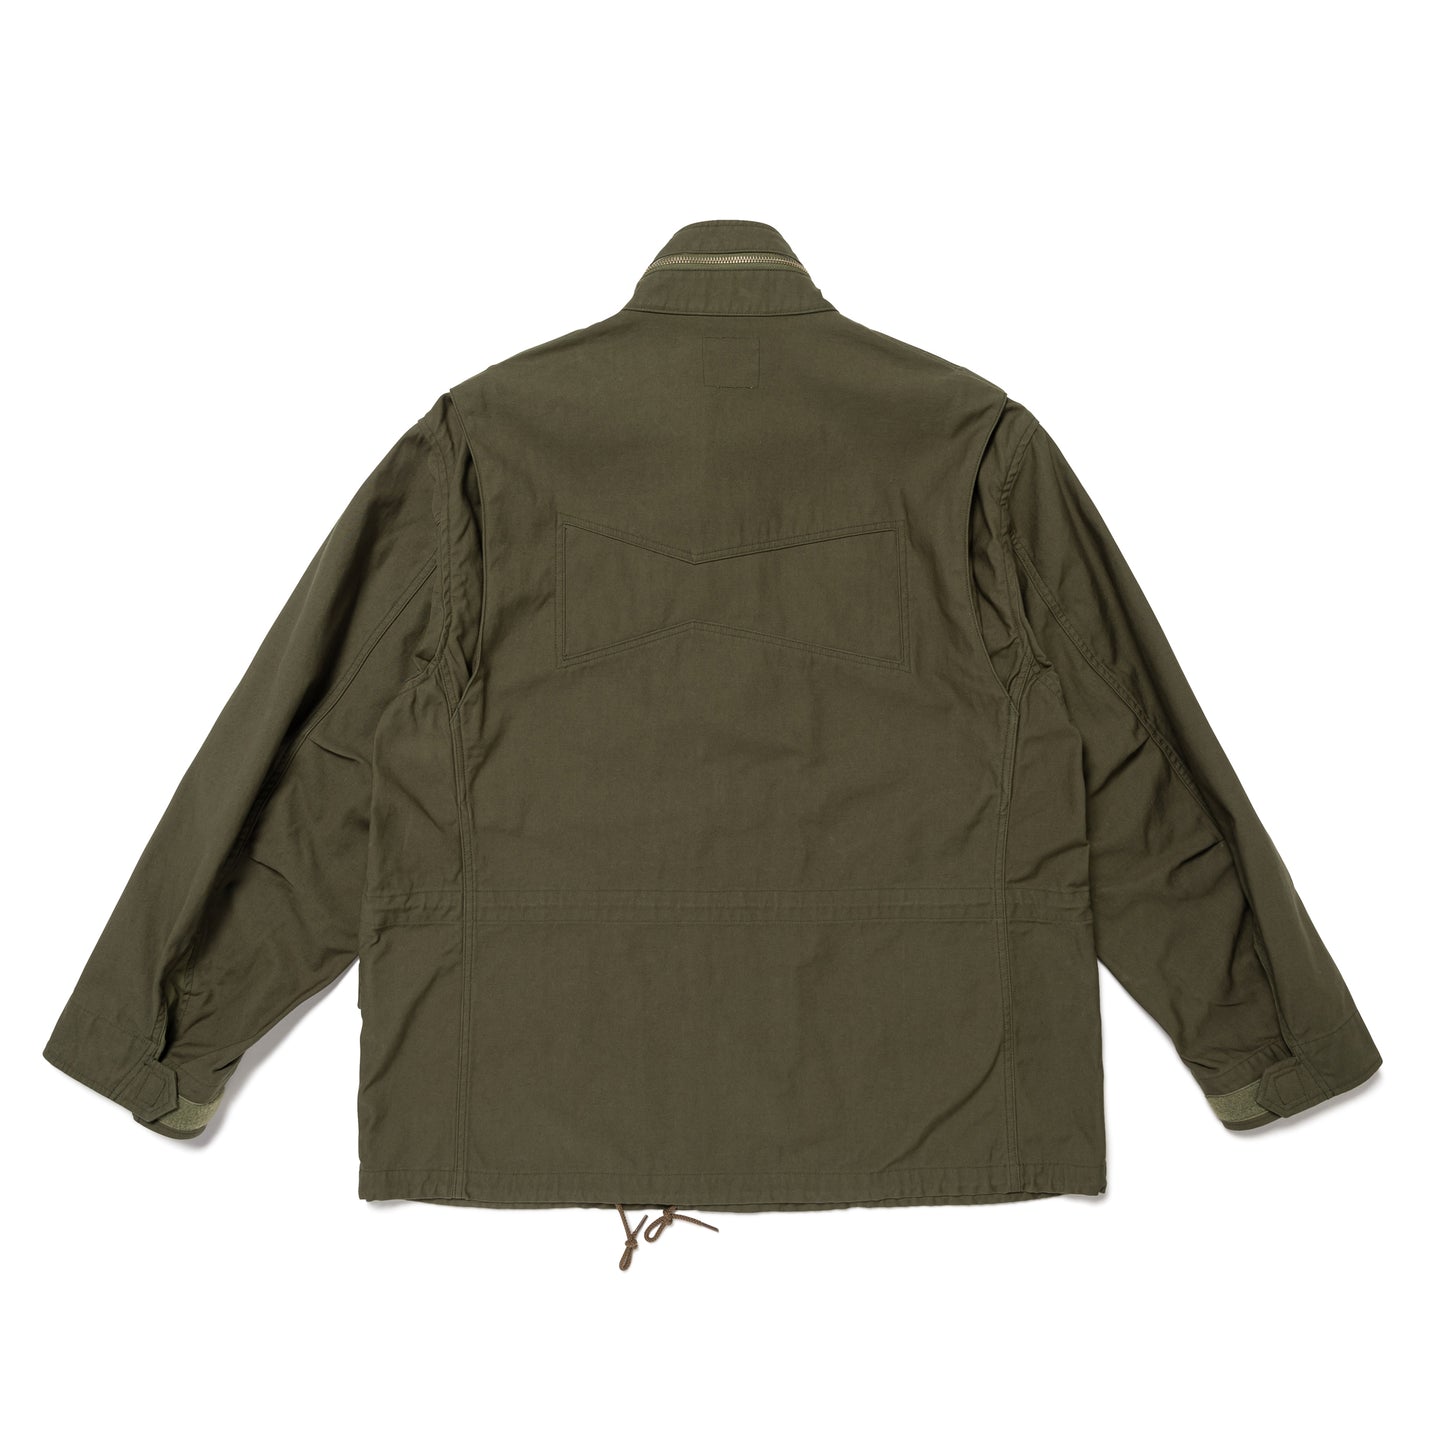 Wasted youth MILITARY JACKET OD-B